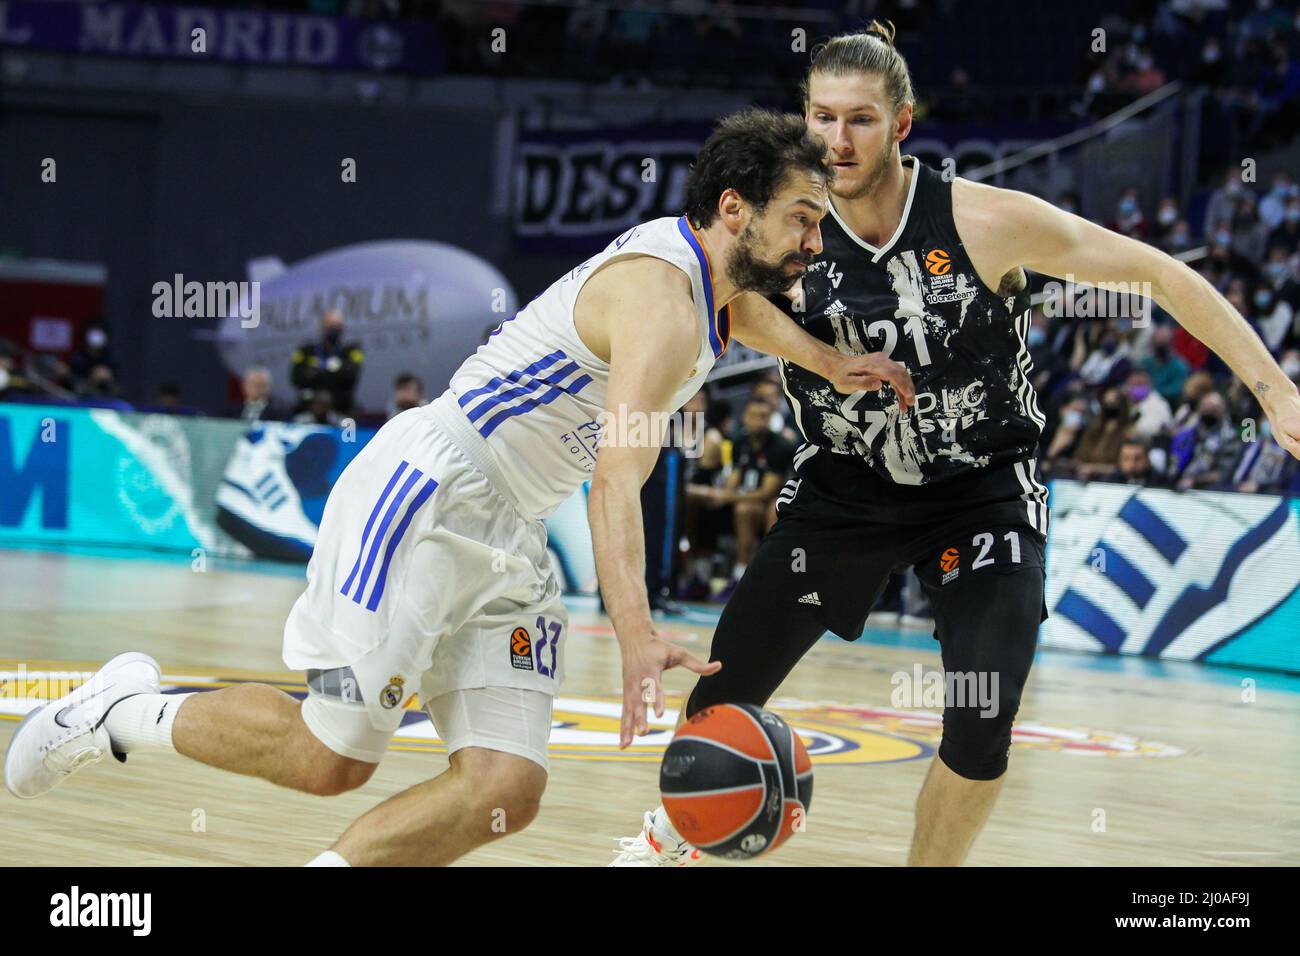 Madrid, Spain. 17th Mar, 2022. Sergio Llull Melia of Real Madrid and Dylan Osetkowski of Asvel Lyon-Villeurbanne during the Turkish Airlines Euroleague basketball match between Real Madrid and Asvel Lyon-Villeurbanne on march 17, 2022 at Wizink Center in Madrid, Spain Credit: Independent Photo Agency/Alamy Live Newss Stock Photo